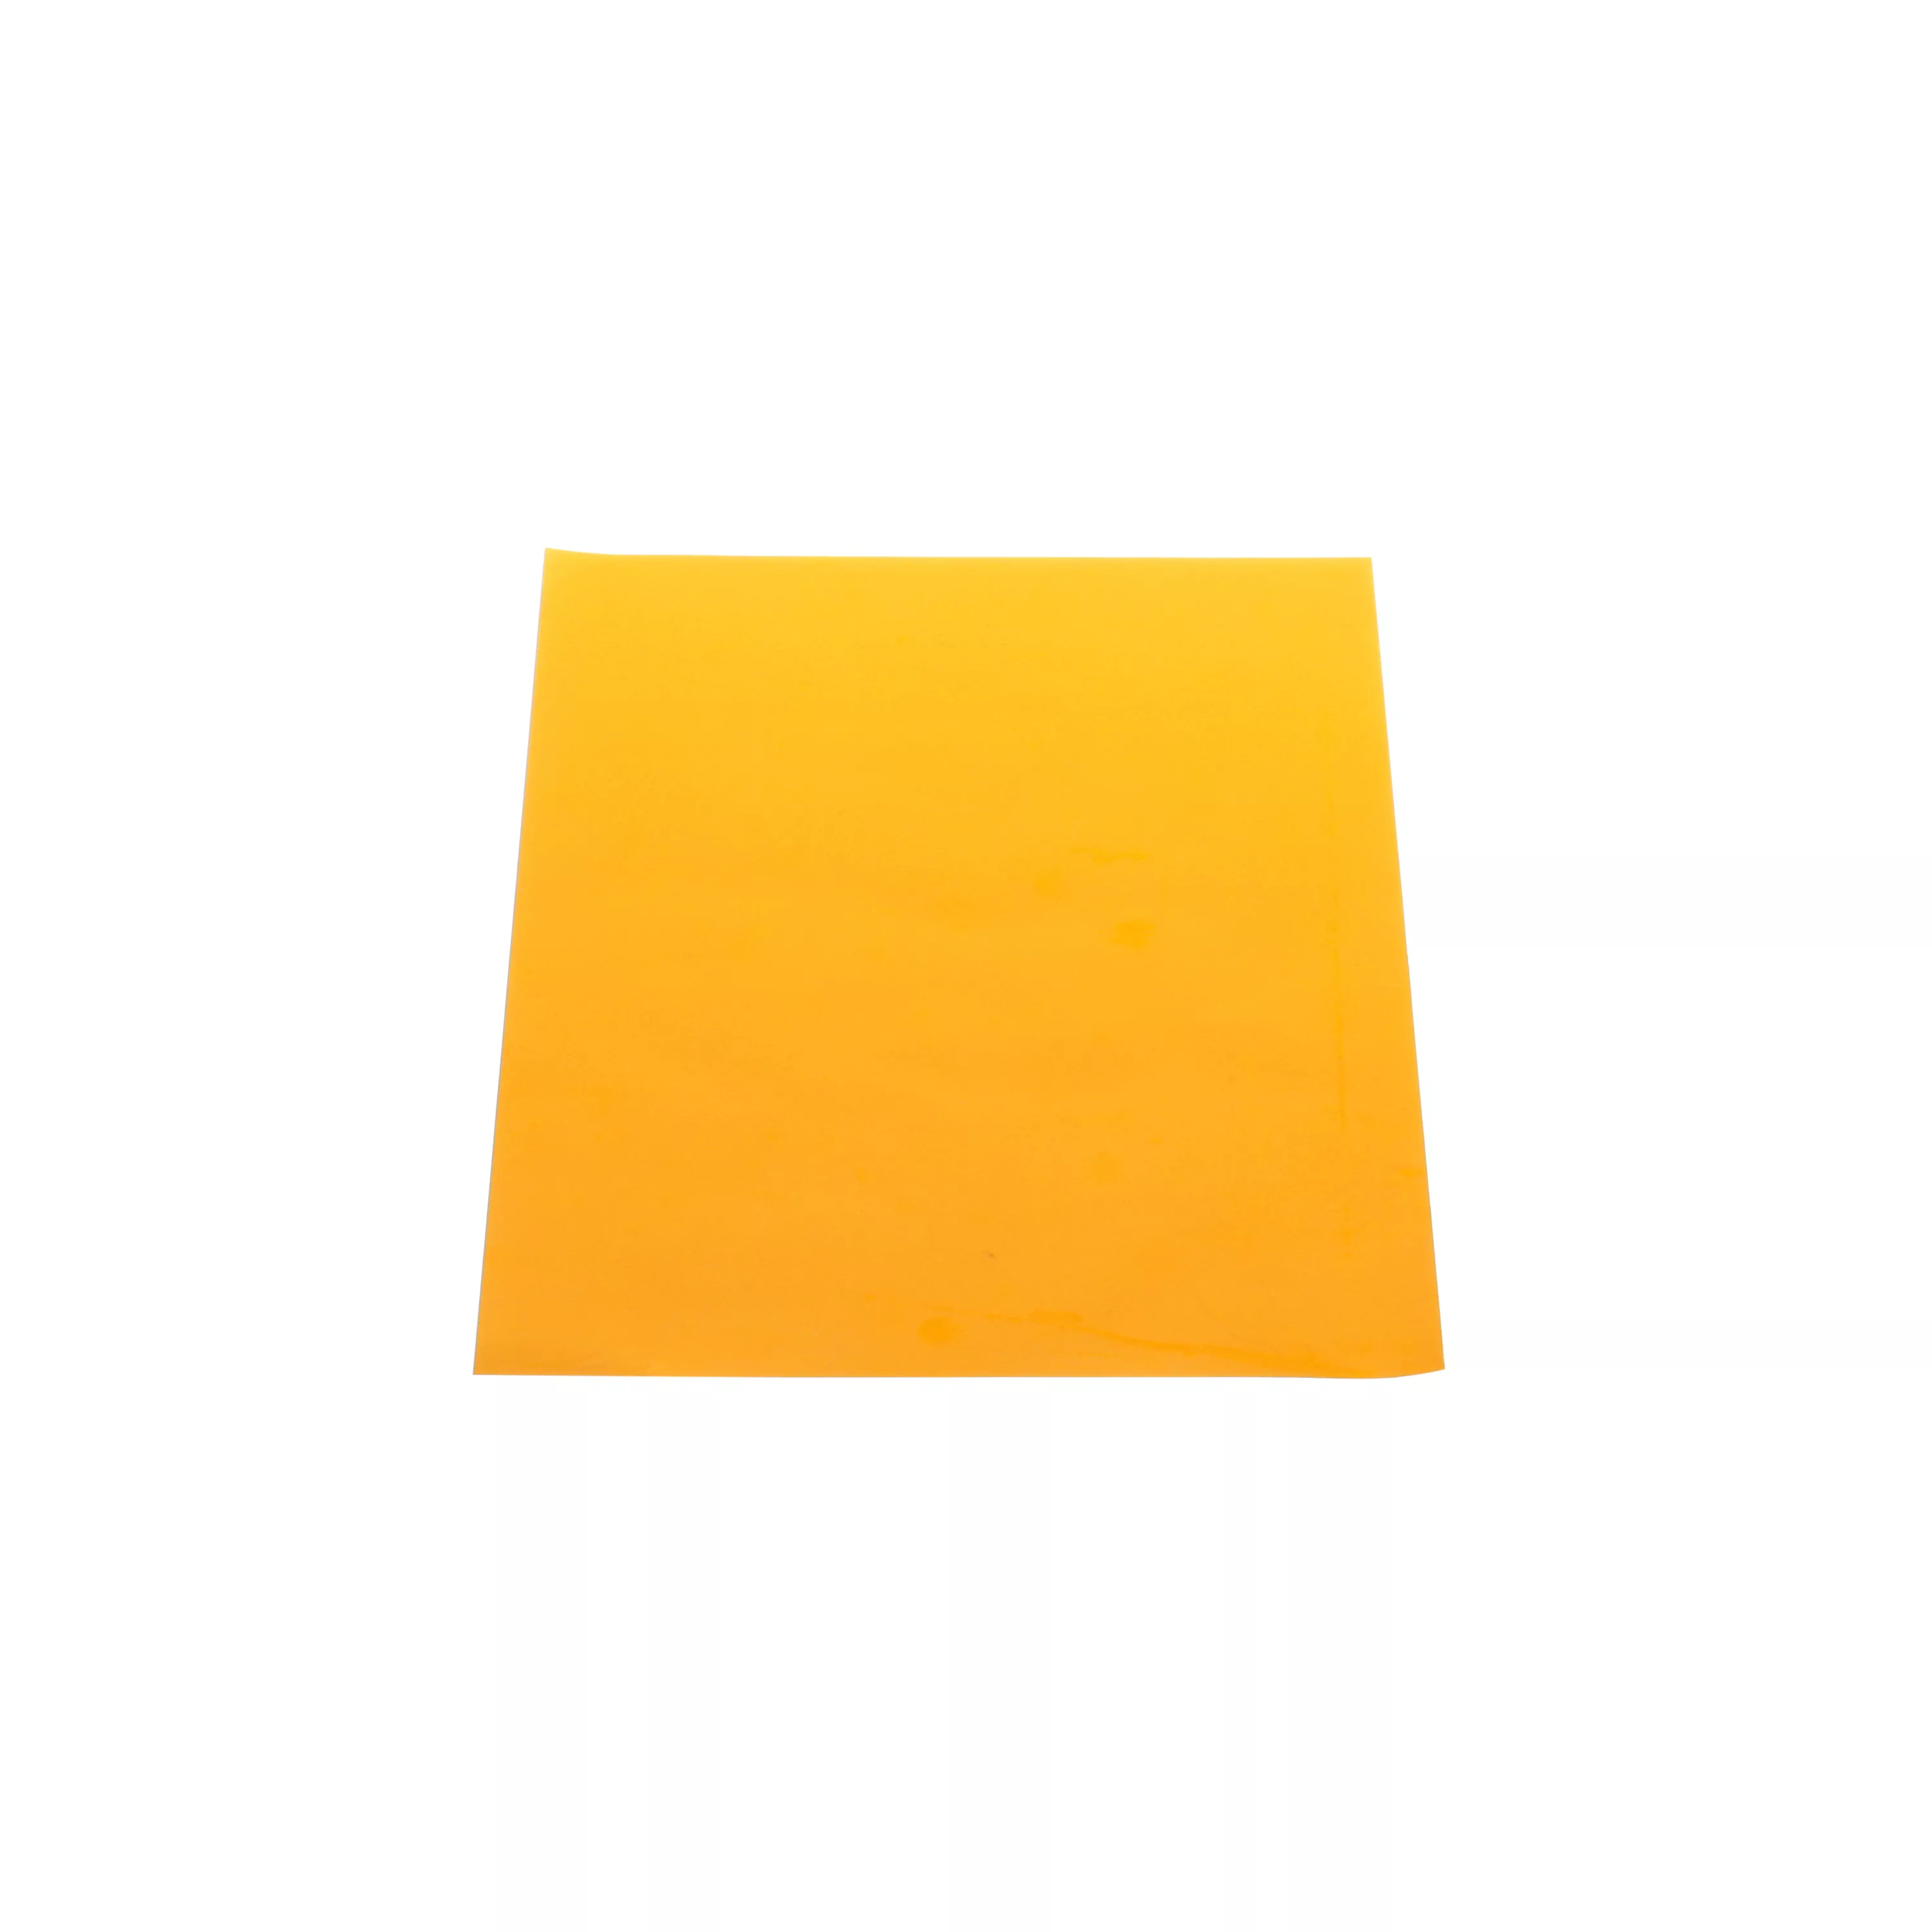 3M™ Thermally Conductive Acrylic Interface Pad 5590PI, 230 mm x 350 mm, 100 Sheets/Case